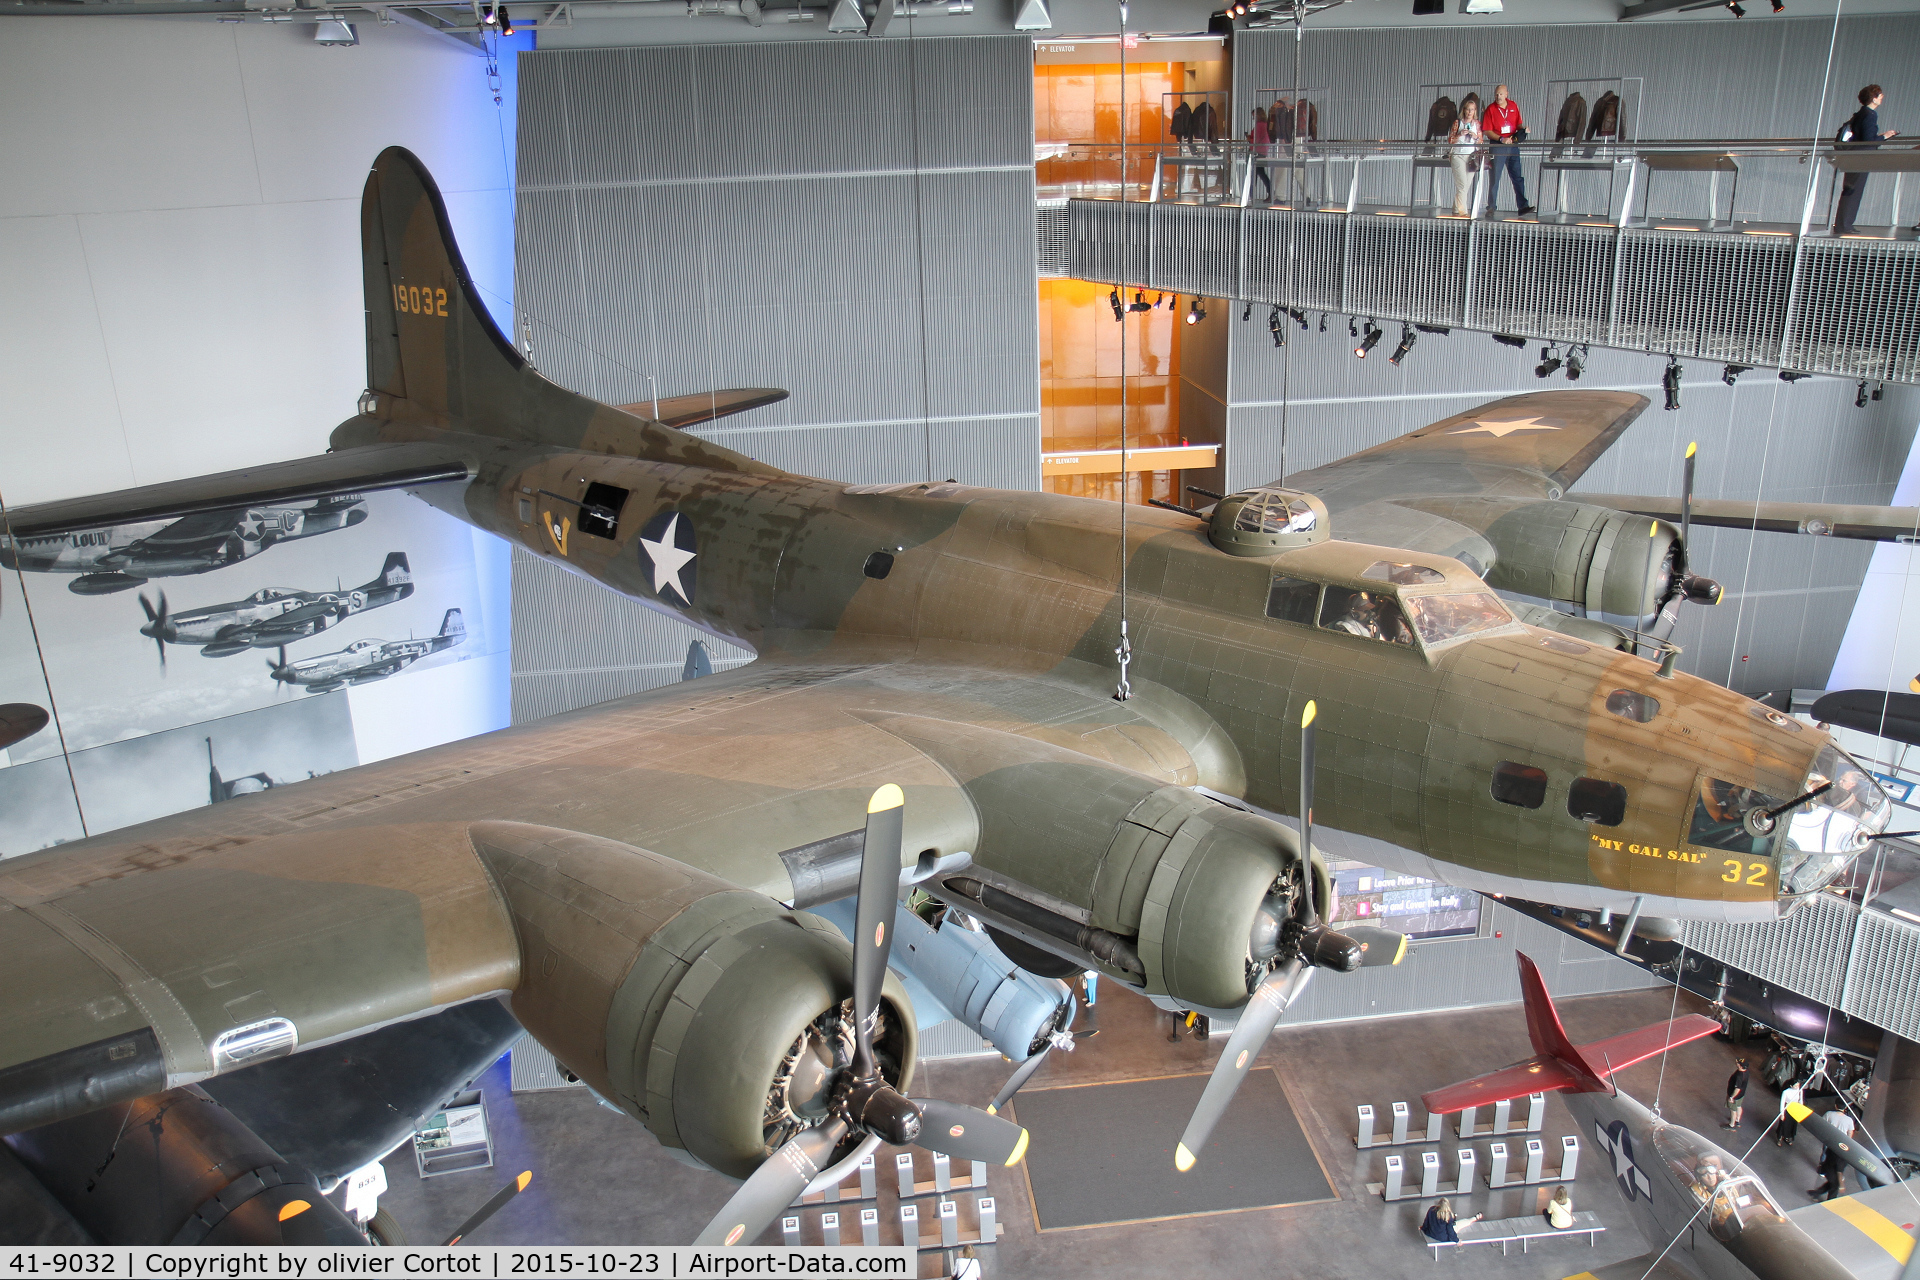 41-9032, 1941 Boeing B-17E Flying Fortress C/N 2503, ramps in the museum allows you different angles